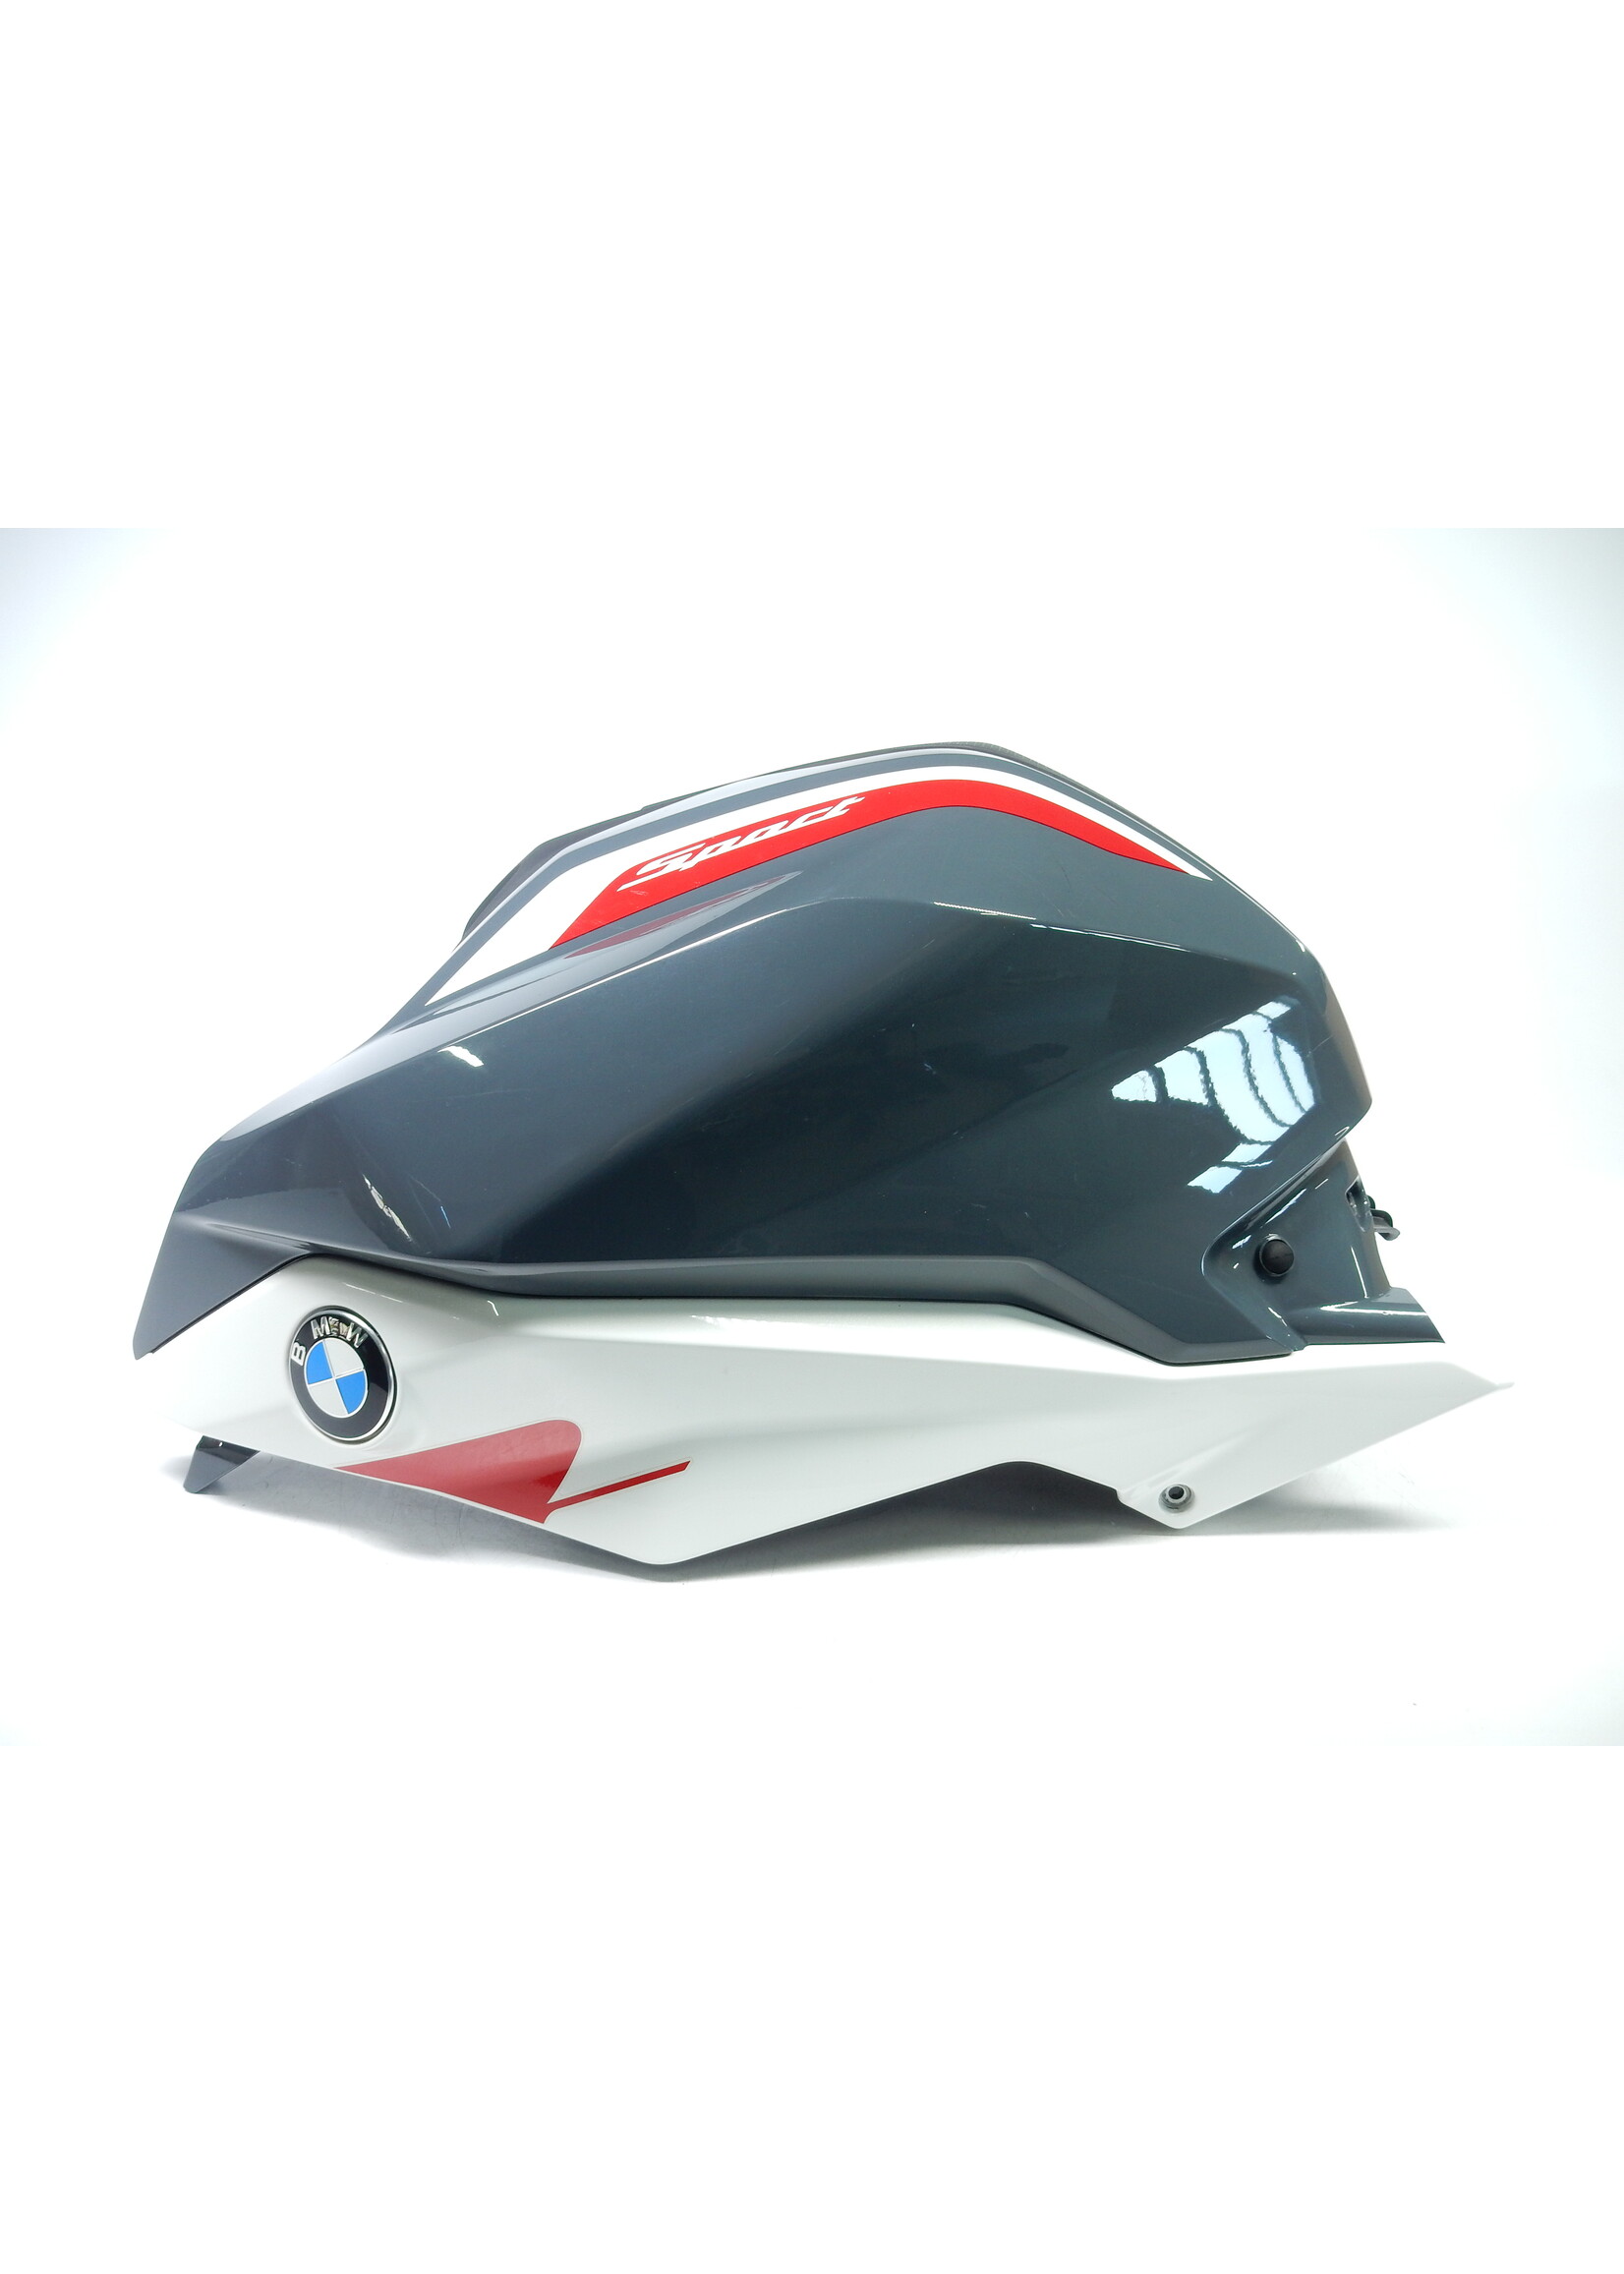 BMW BMW G 310 R Tank cover, middle / Tank trim panel, left / Tank trim panel, right / Plaque holder, left / Plaque holder, right / 46638556775 / 46637922115 / 46637922116 / 46637922119 / 46637922120